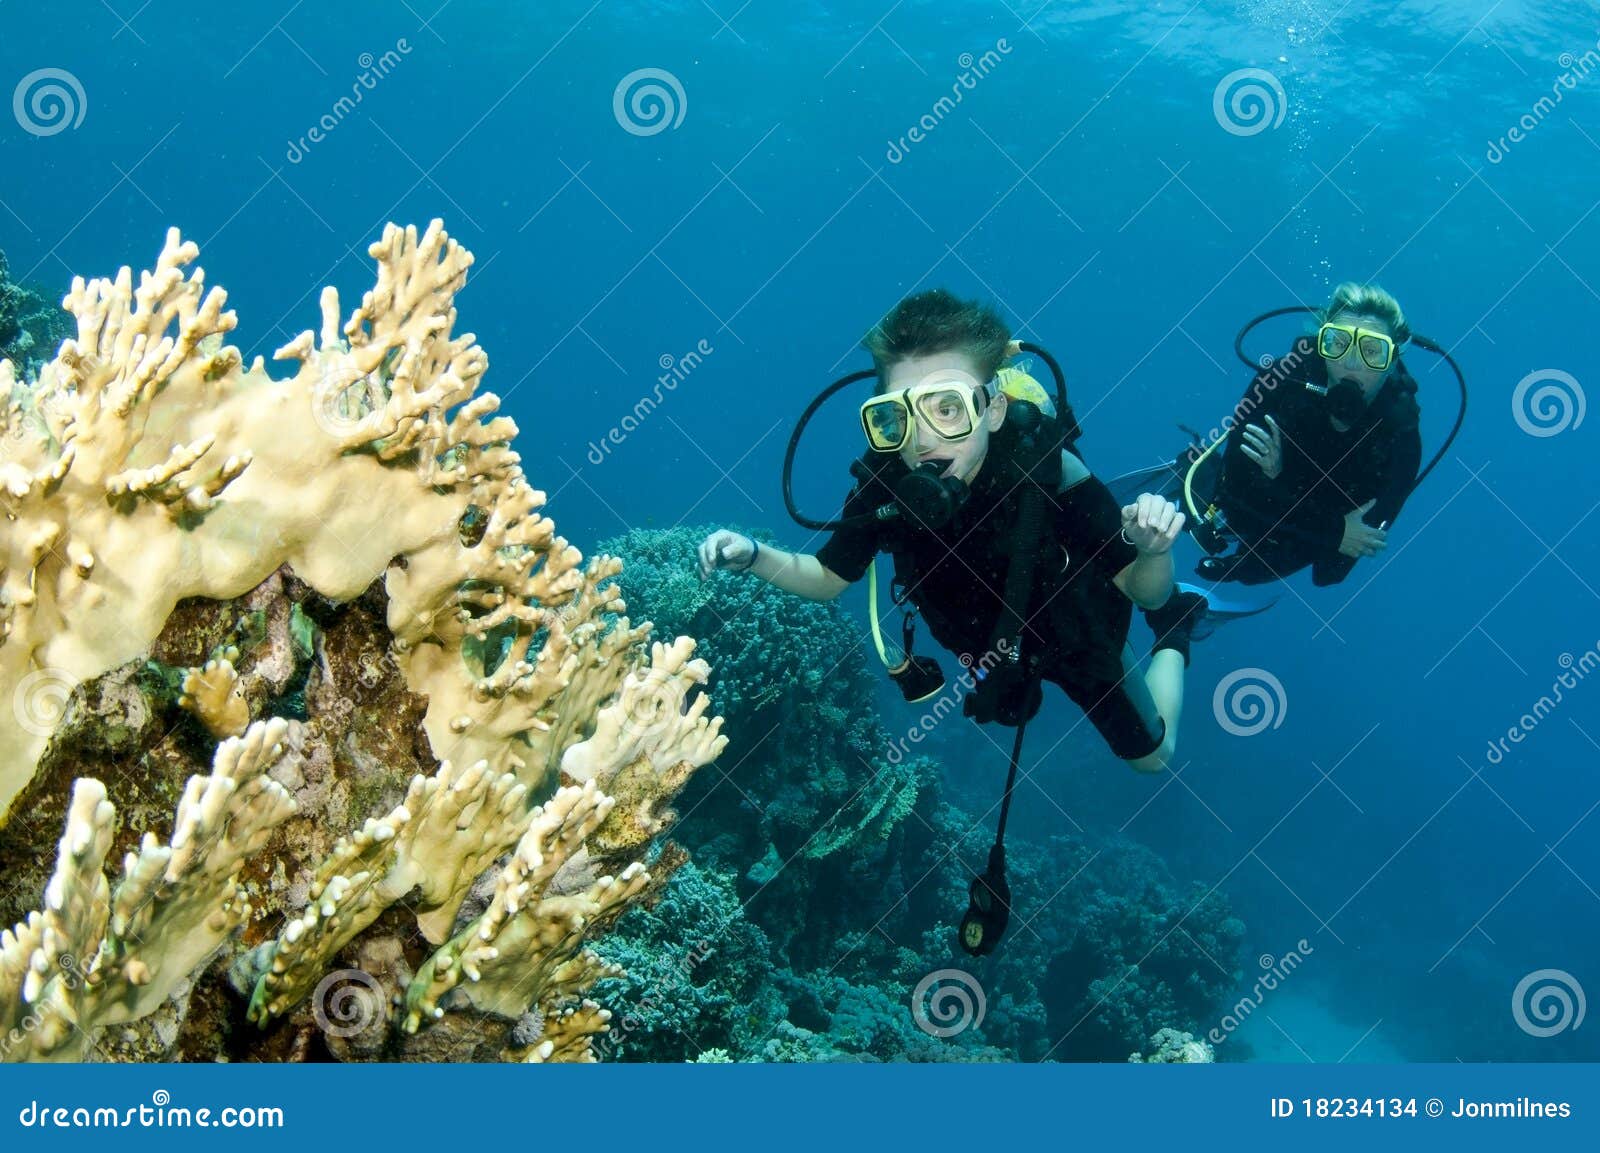 child and dad scuba diving